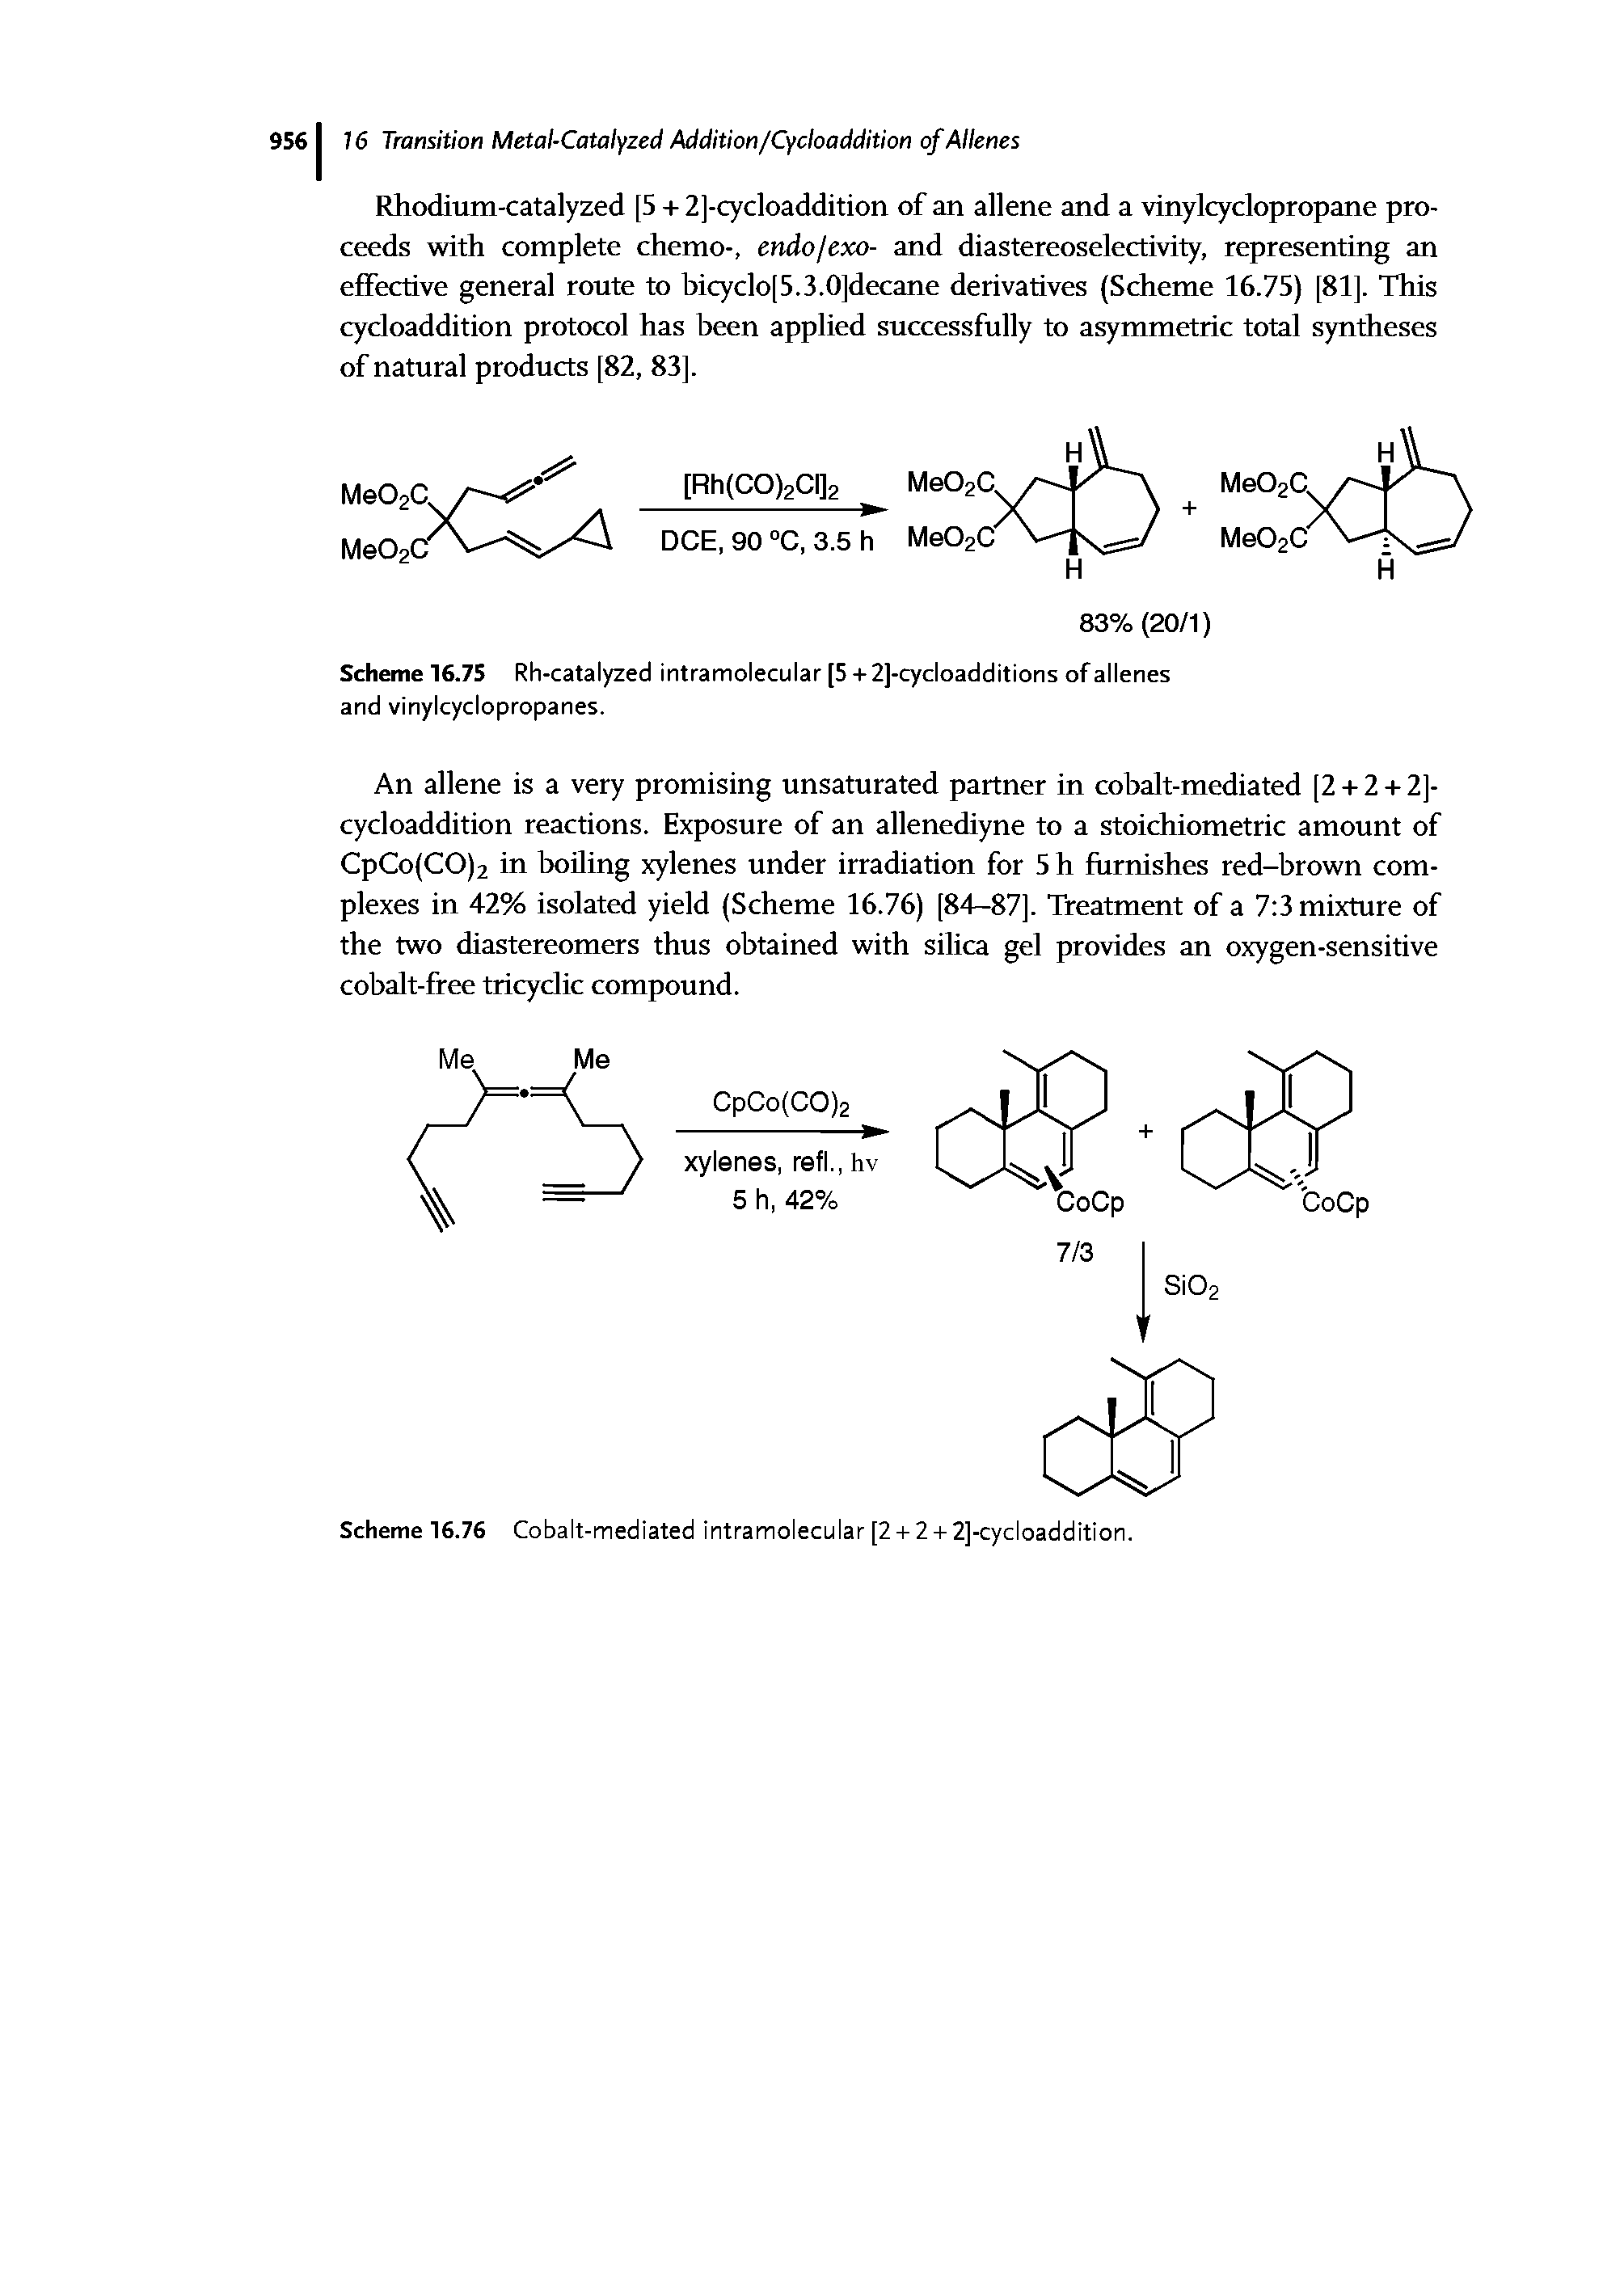 Scheme 16.75 Rh-catalyzed intramolecular [5 + 2]-cycloadditions of allenes and vinylcyclopropanes.